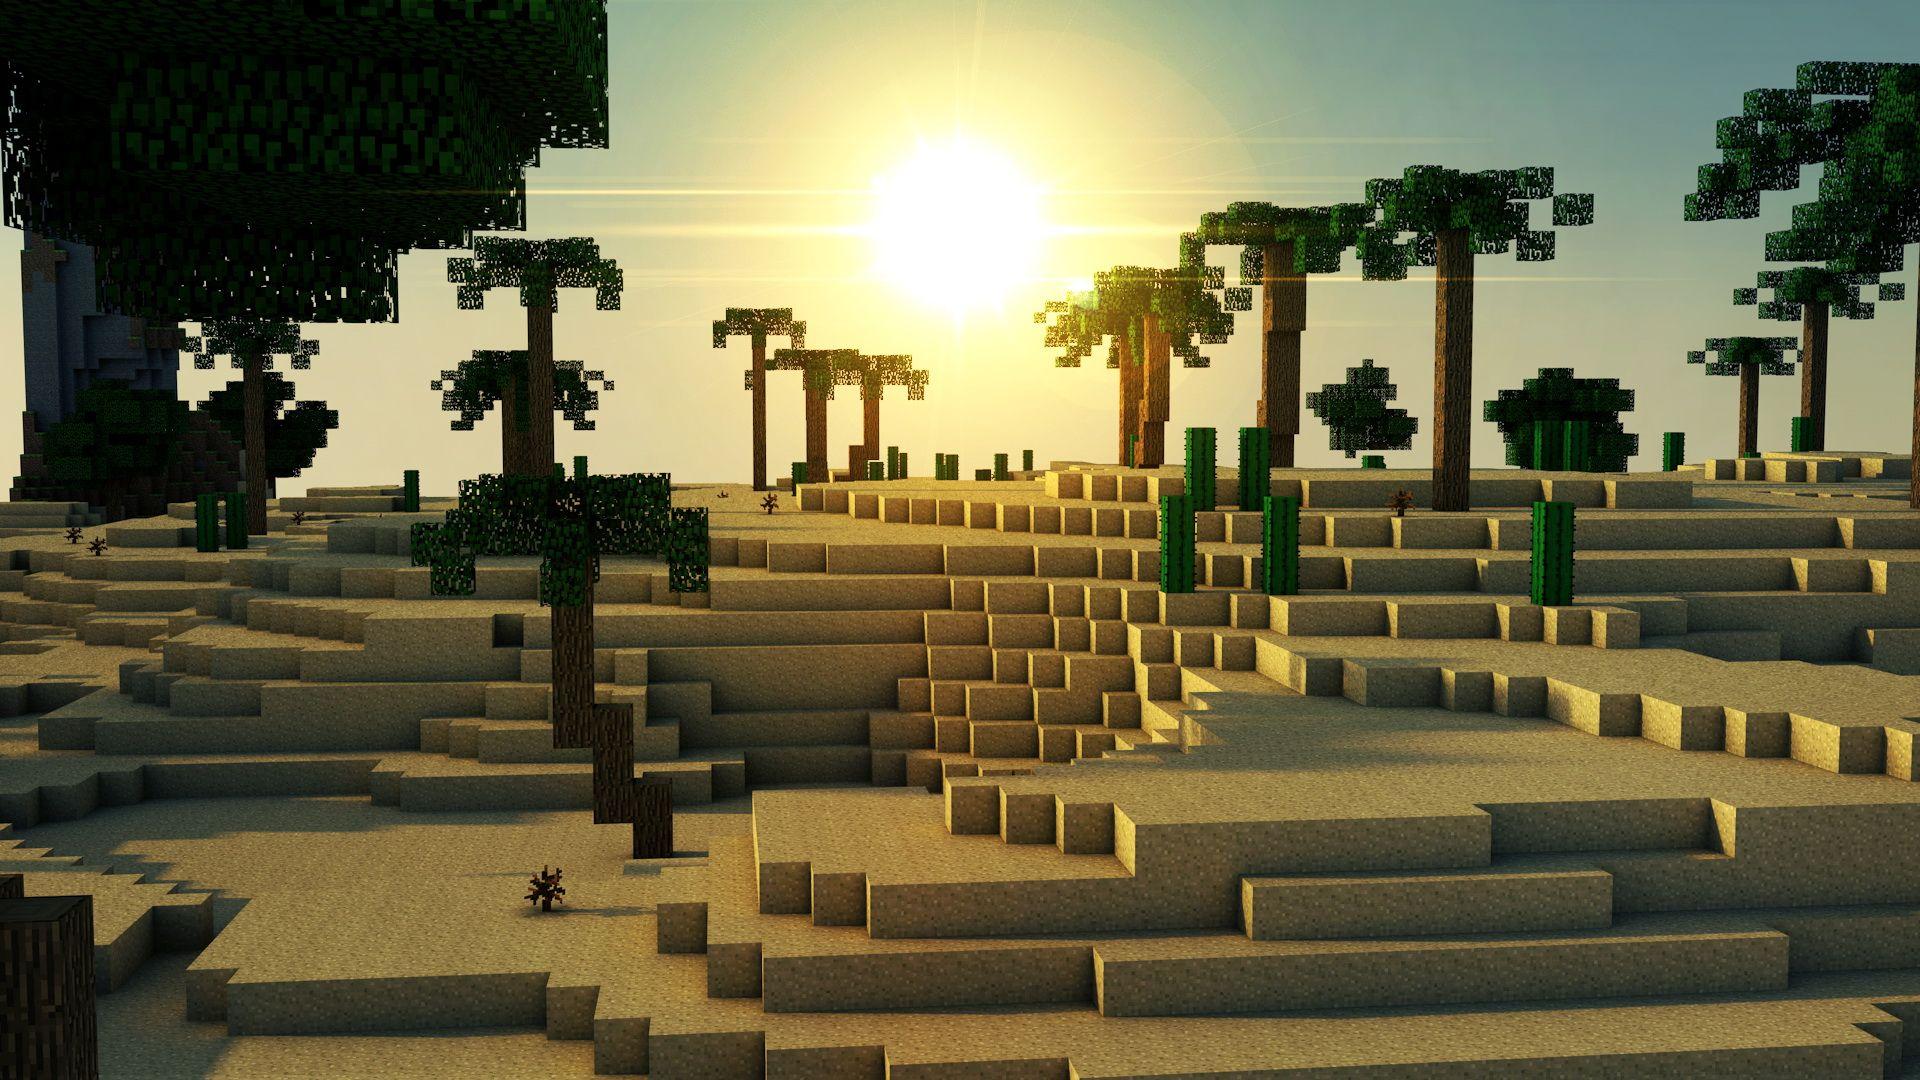 Image of Minecraft Wallpapers download free